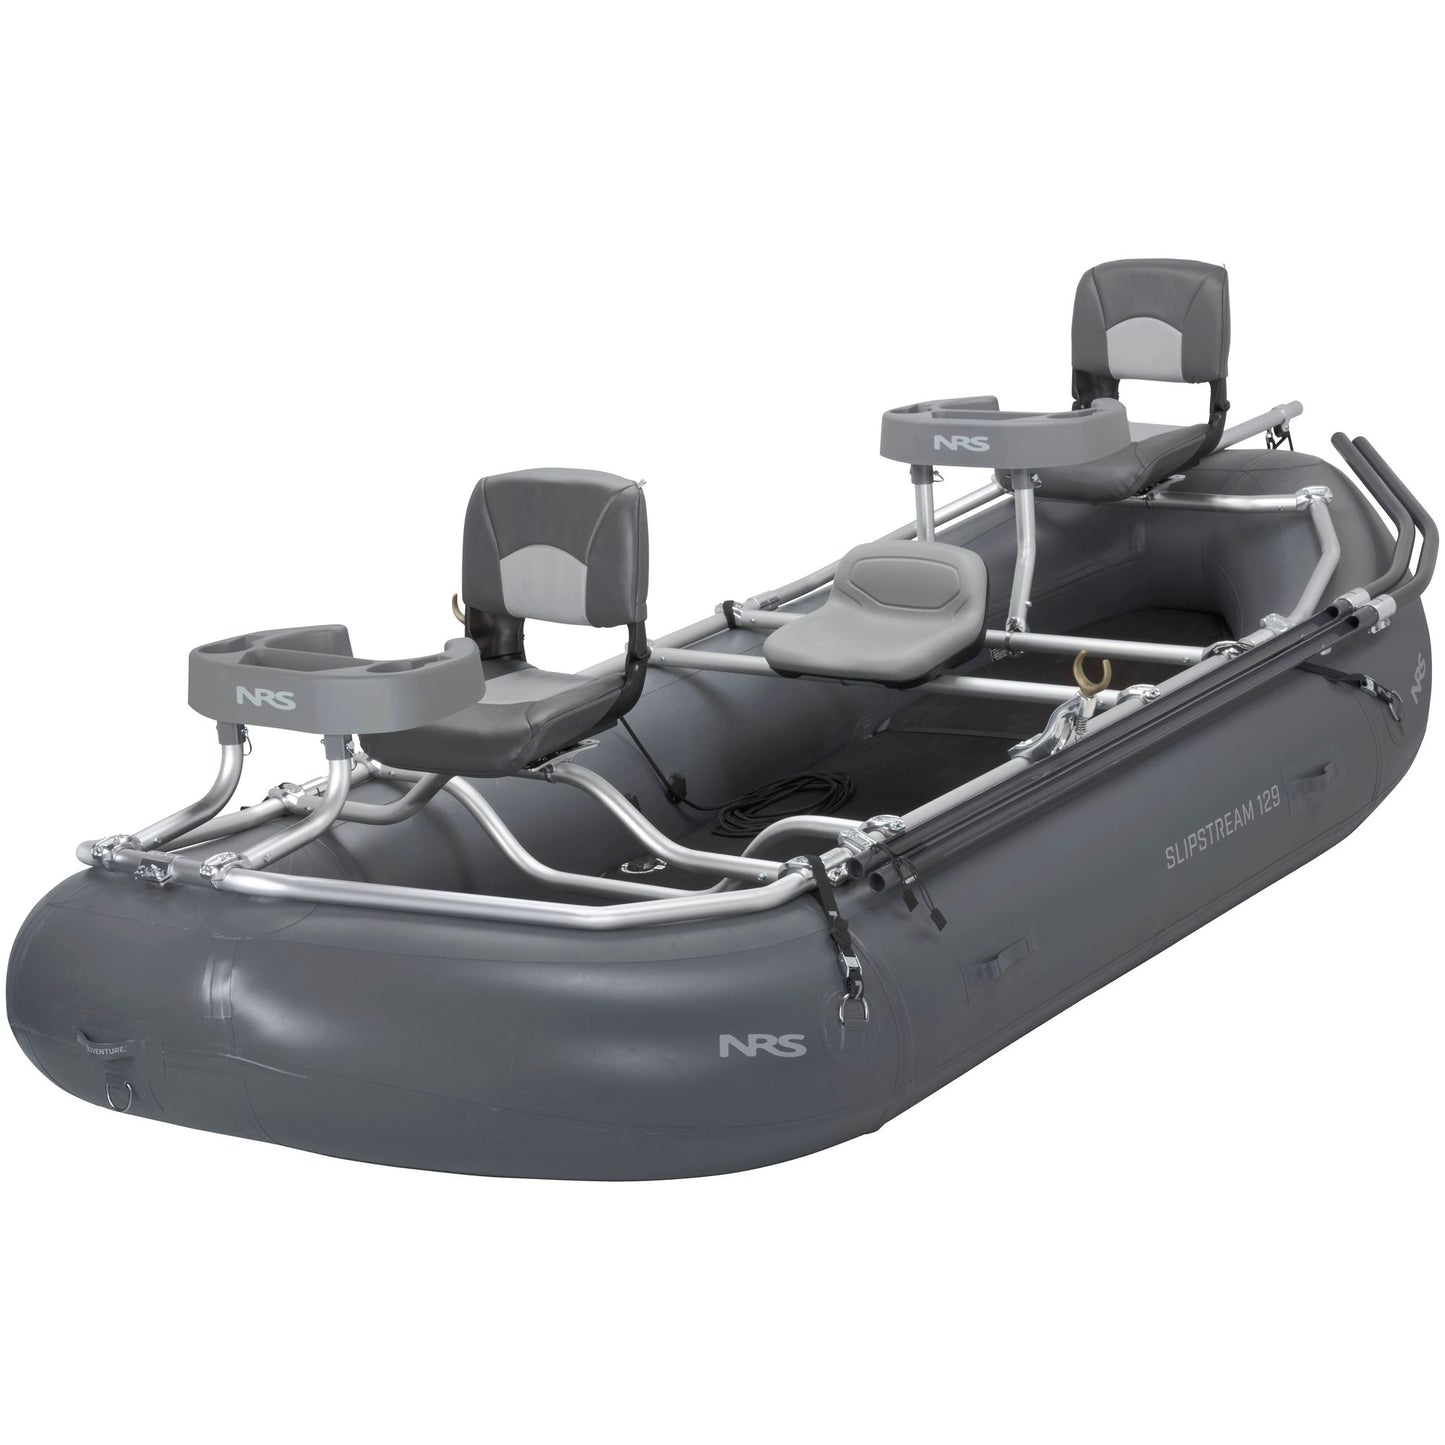 A durable gray Slipstream Fishing Raft by NRS with two seats.